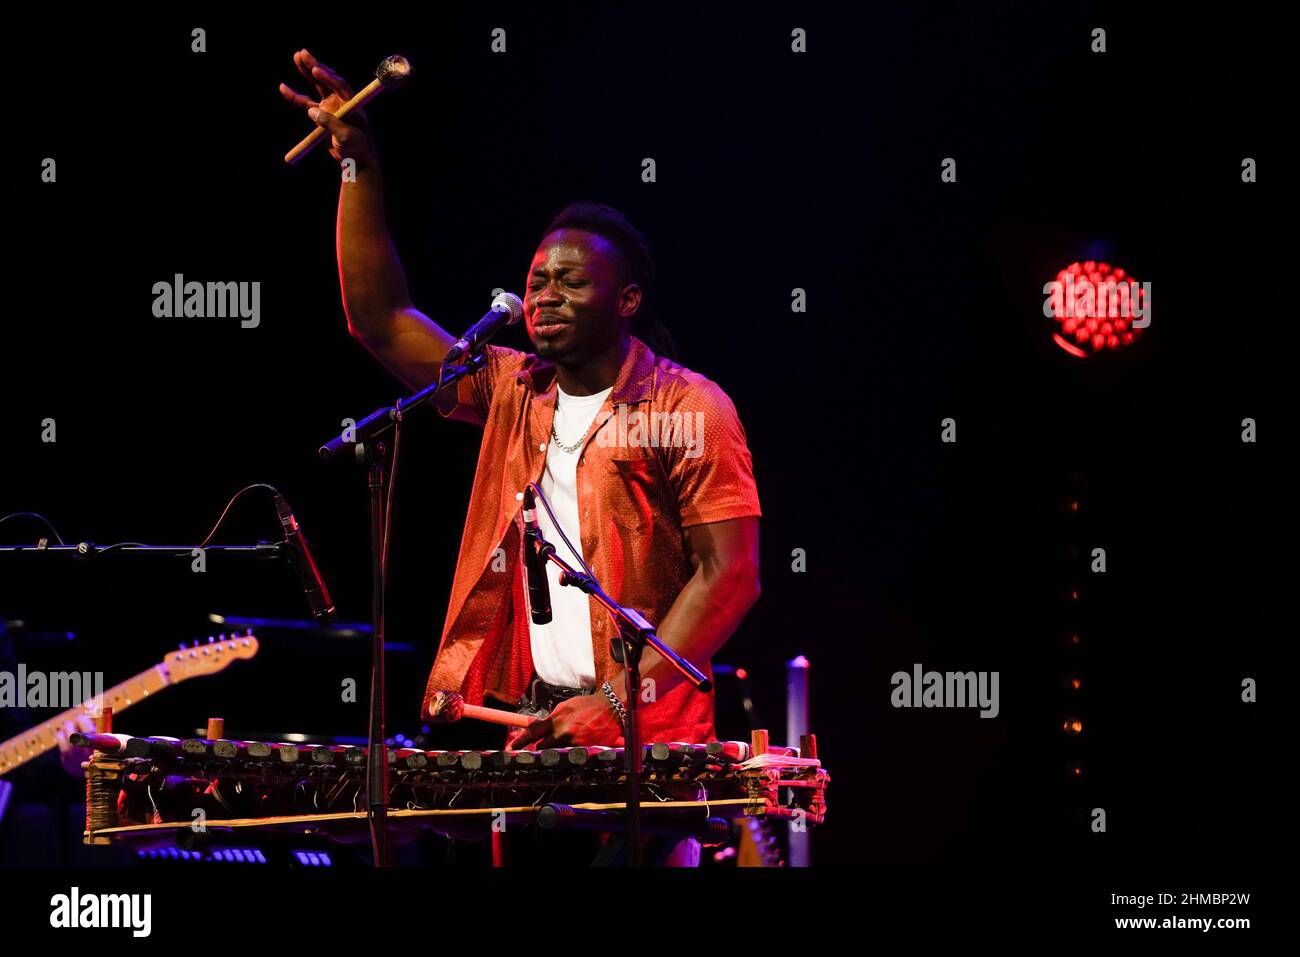 Glasgow Scotland, 5th February 2022. N’famady Kouyaté, Guinea west Africa multi-instrumentalist musician, performed at the Glasgow Theatre Royal at Ce Stock Photo